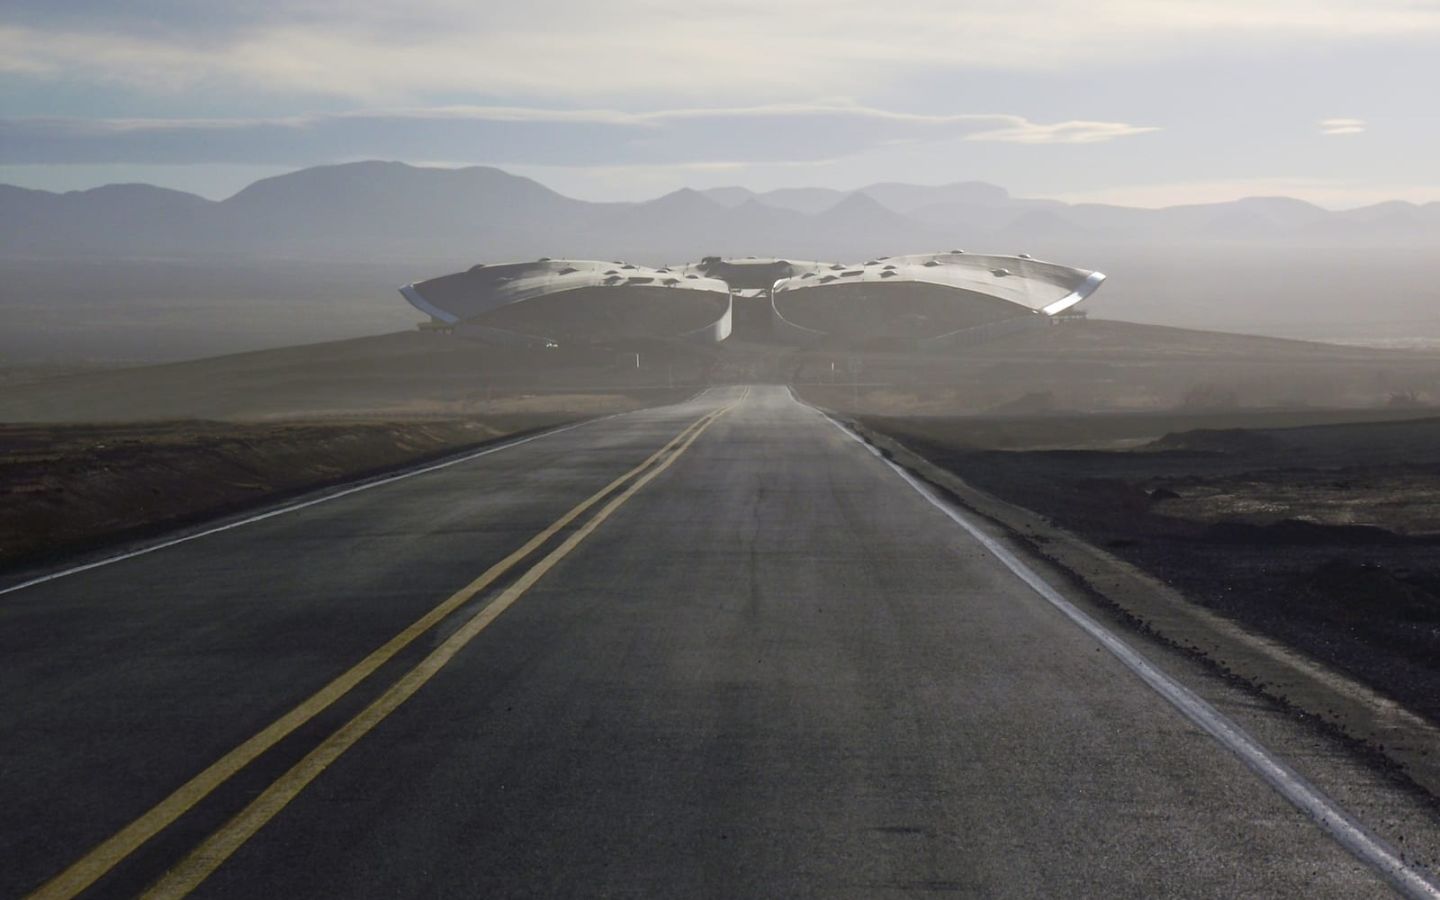 View of Spaceport America from down the runway